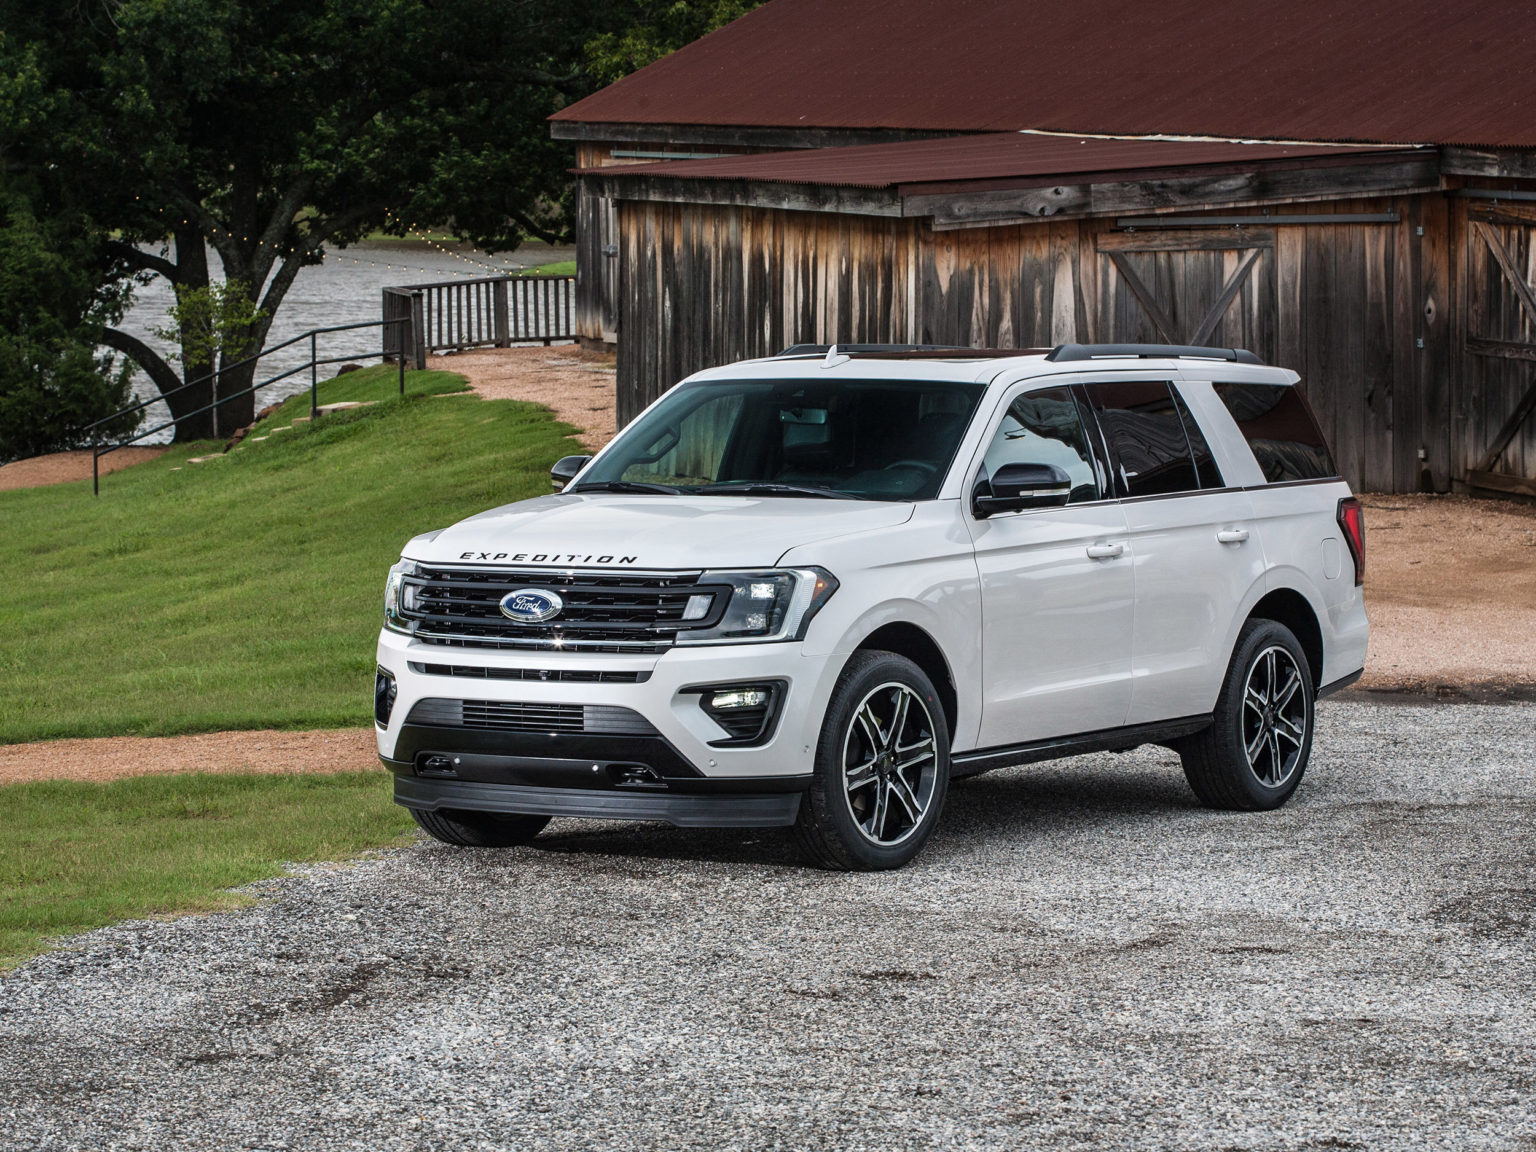 The Ford Expedition has made the cut, alongside some Toyota, Honda, and Kia models, among others.